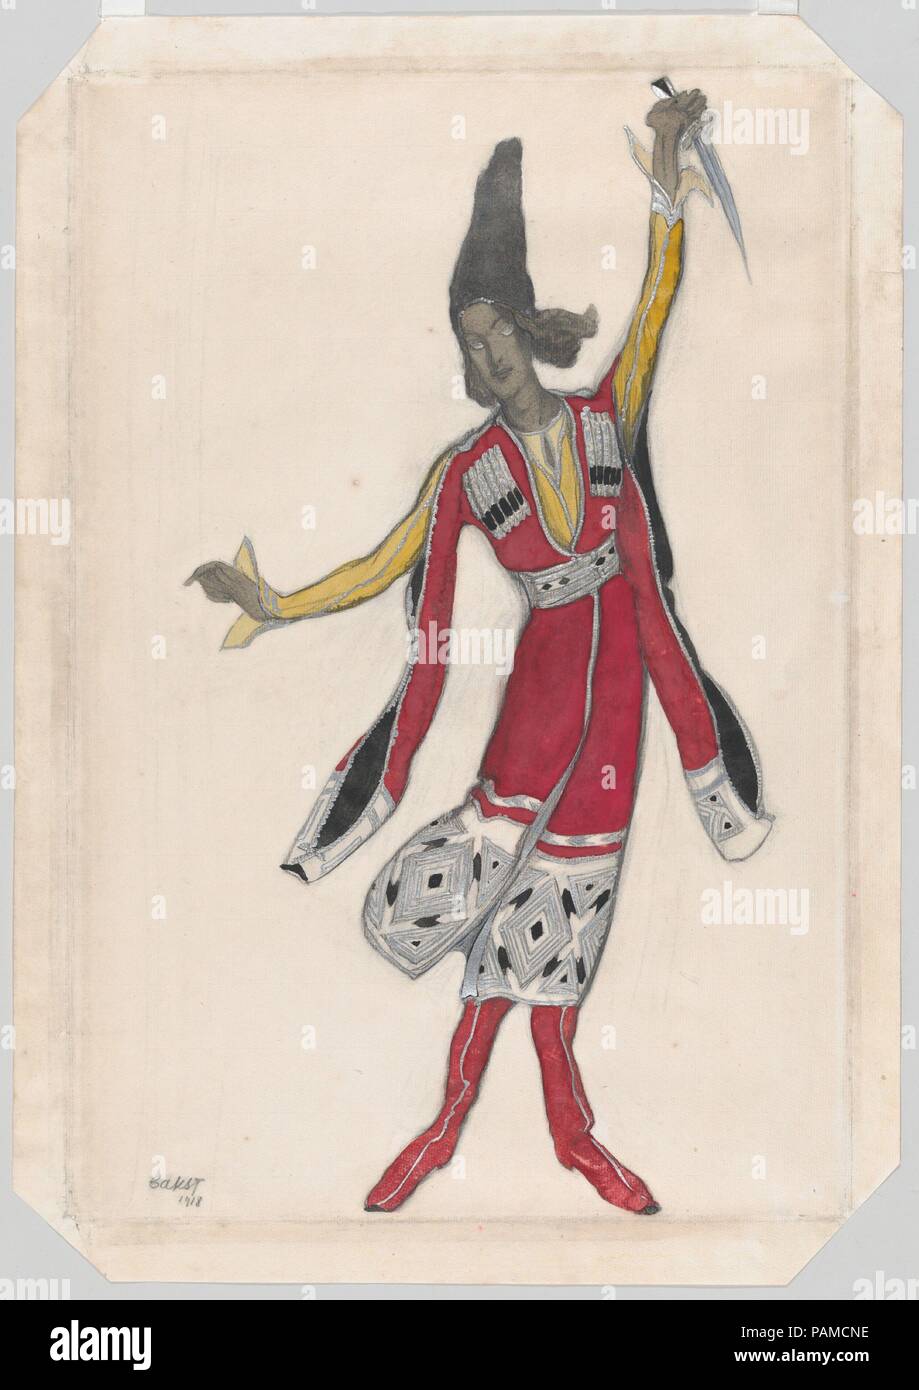 Costume Design for the Ballet 'Thamar', premiered at the Théâtre du Châtelet in Paris, 1912. Artist: Léon Bakst (Russian, Grodno 1866-1924 Paris). Dimensions: Sheet: 19 × 12 1/4 in. (48.3 × 31.1 cm). Date: 1918.  Drawing with a costume design for Fokine's ballet Thamar,' by Léon Bakst. This ballet was premiered at the Théâtre du Châtelet in Paris in 1912. Trying to restage the exotic success of 'Schéhérazade', Serge Siaghilev chose to present this ballet in the third season of the Ballets Russes, although without success. Despite finding the ballet rather insipid, the public was pleased with B Stock Photo